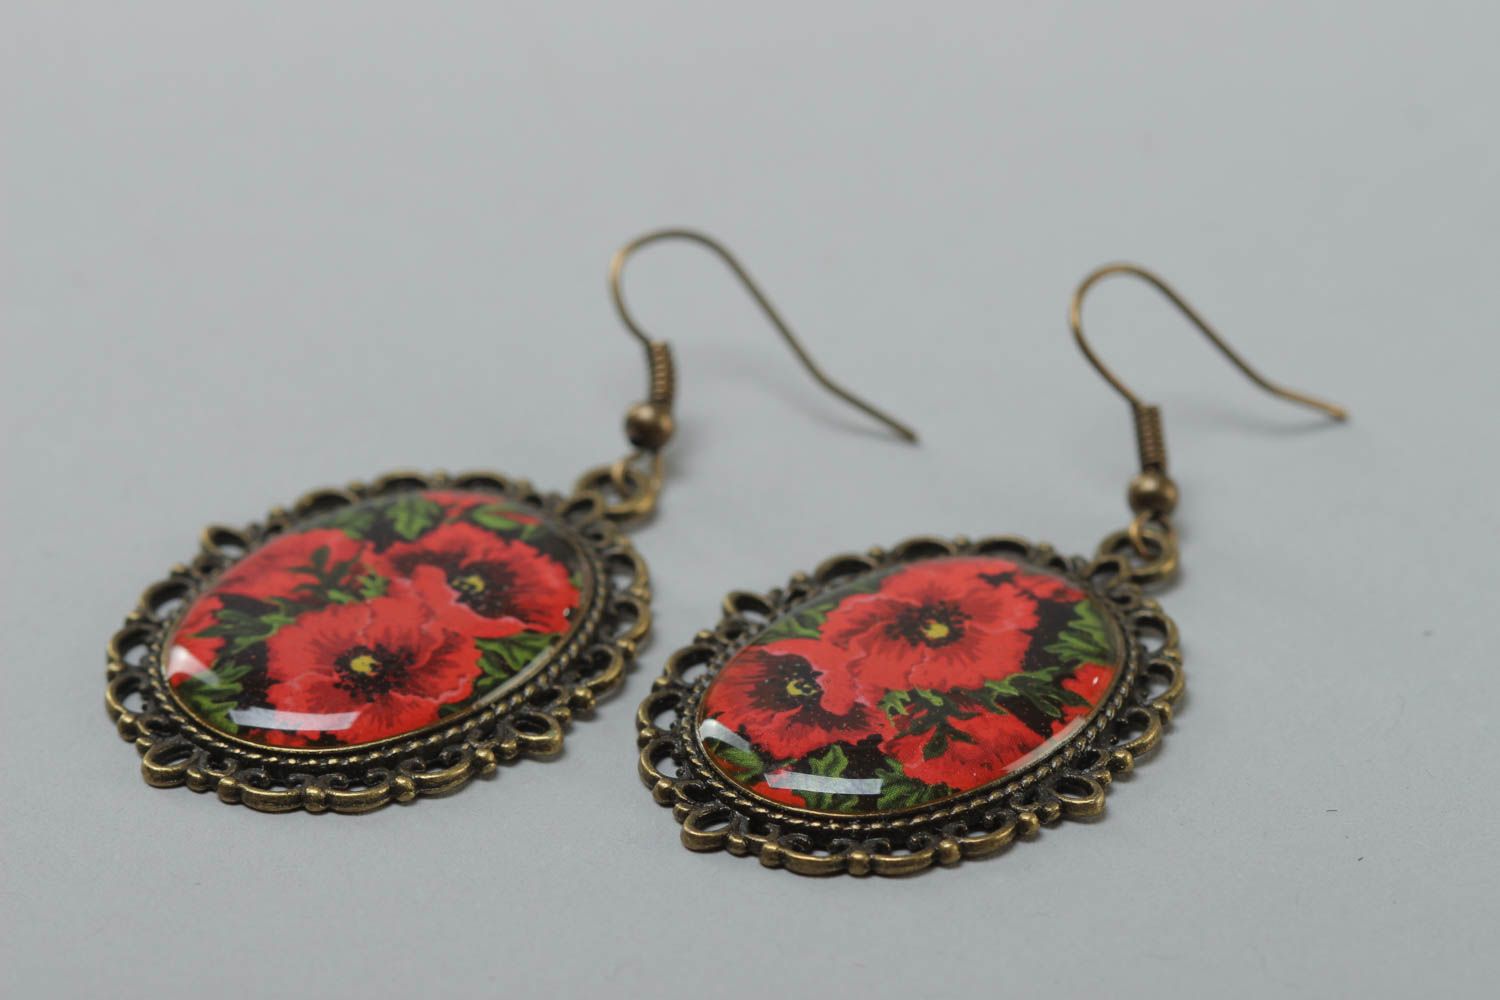 Egg-shaped vintage handmade earrings made of glass glaze with red poppies photo 3